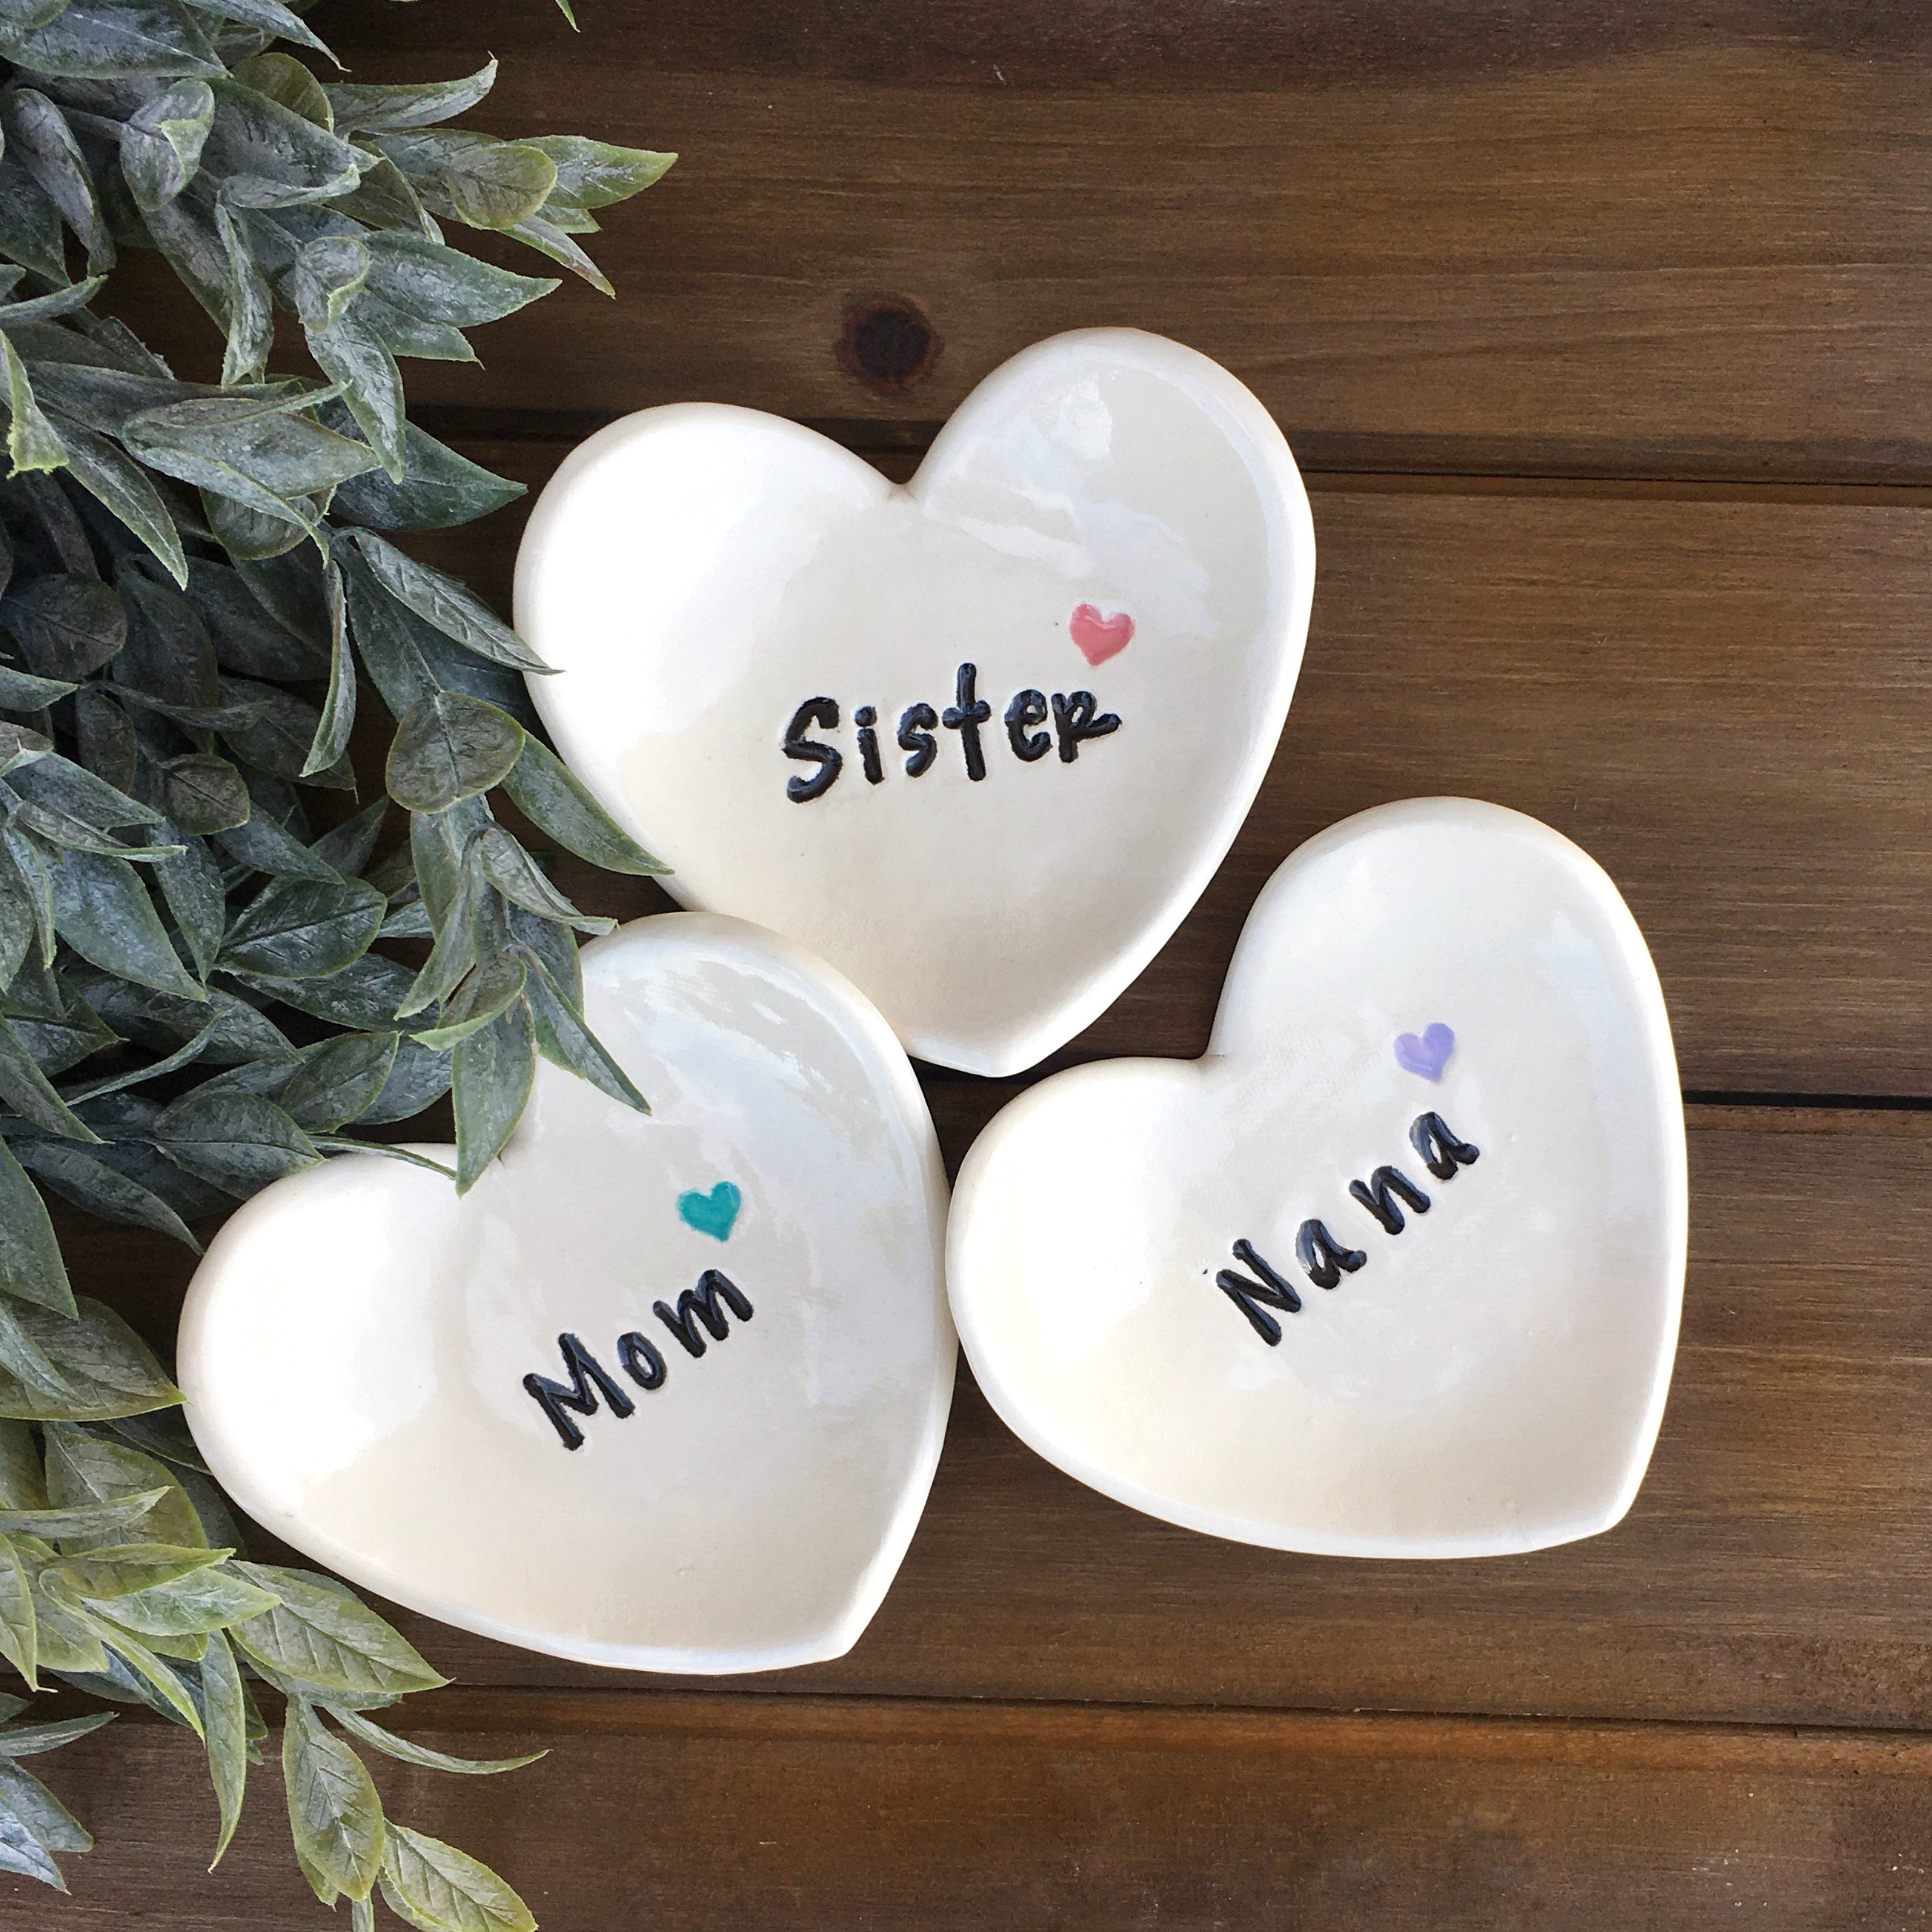 Best Sister Gift, Sister Moving Away Jewelry Dish, Sister Gifts